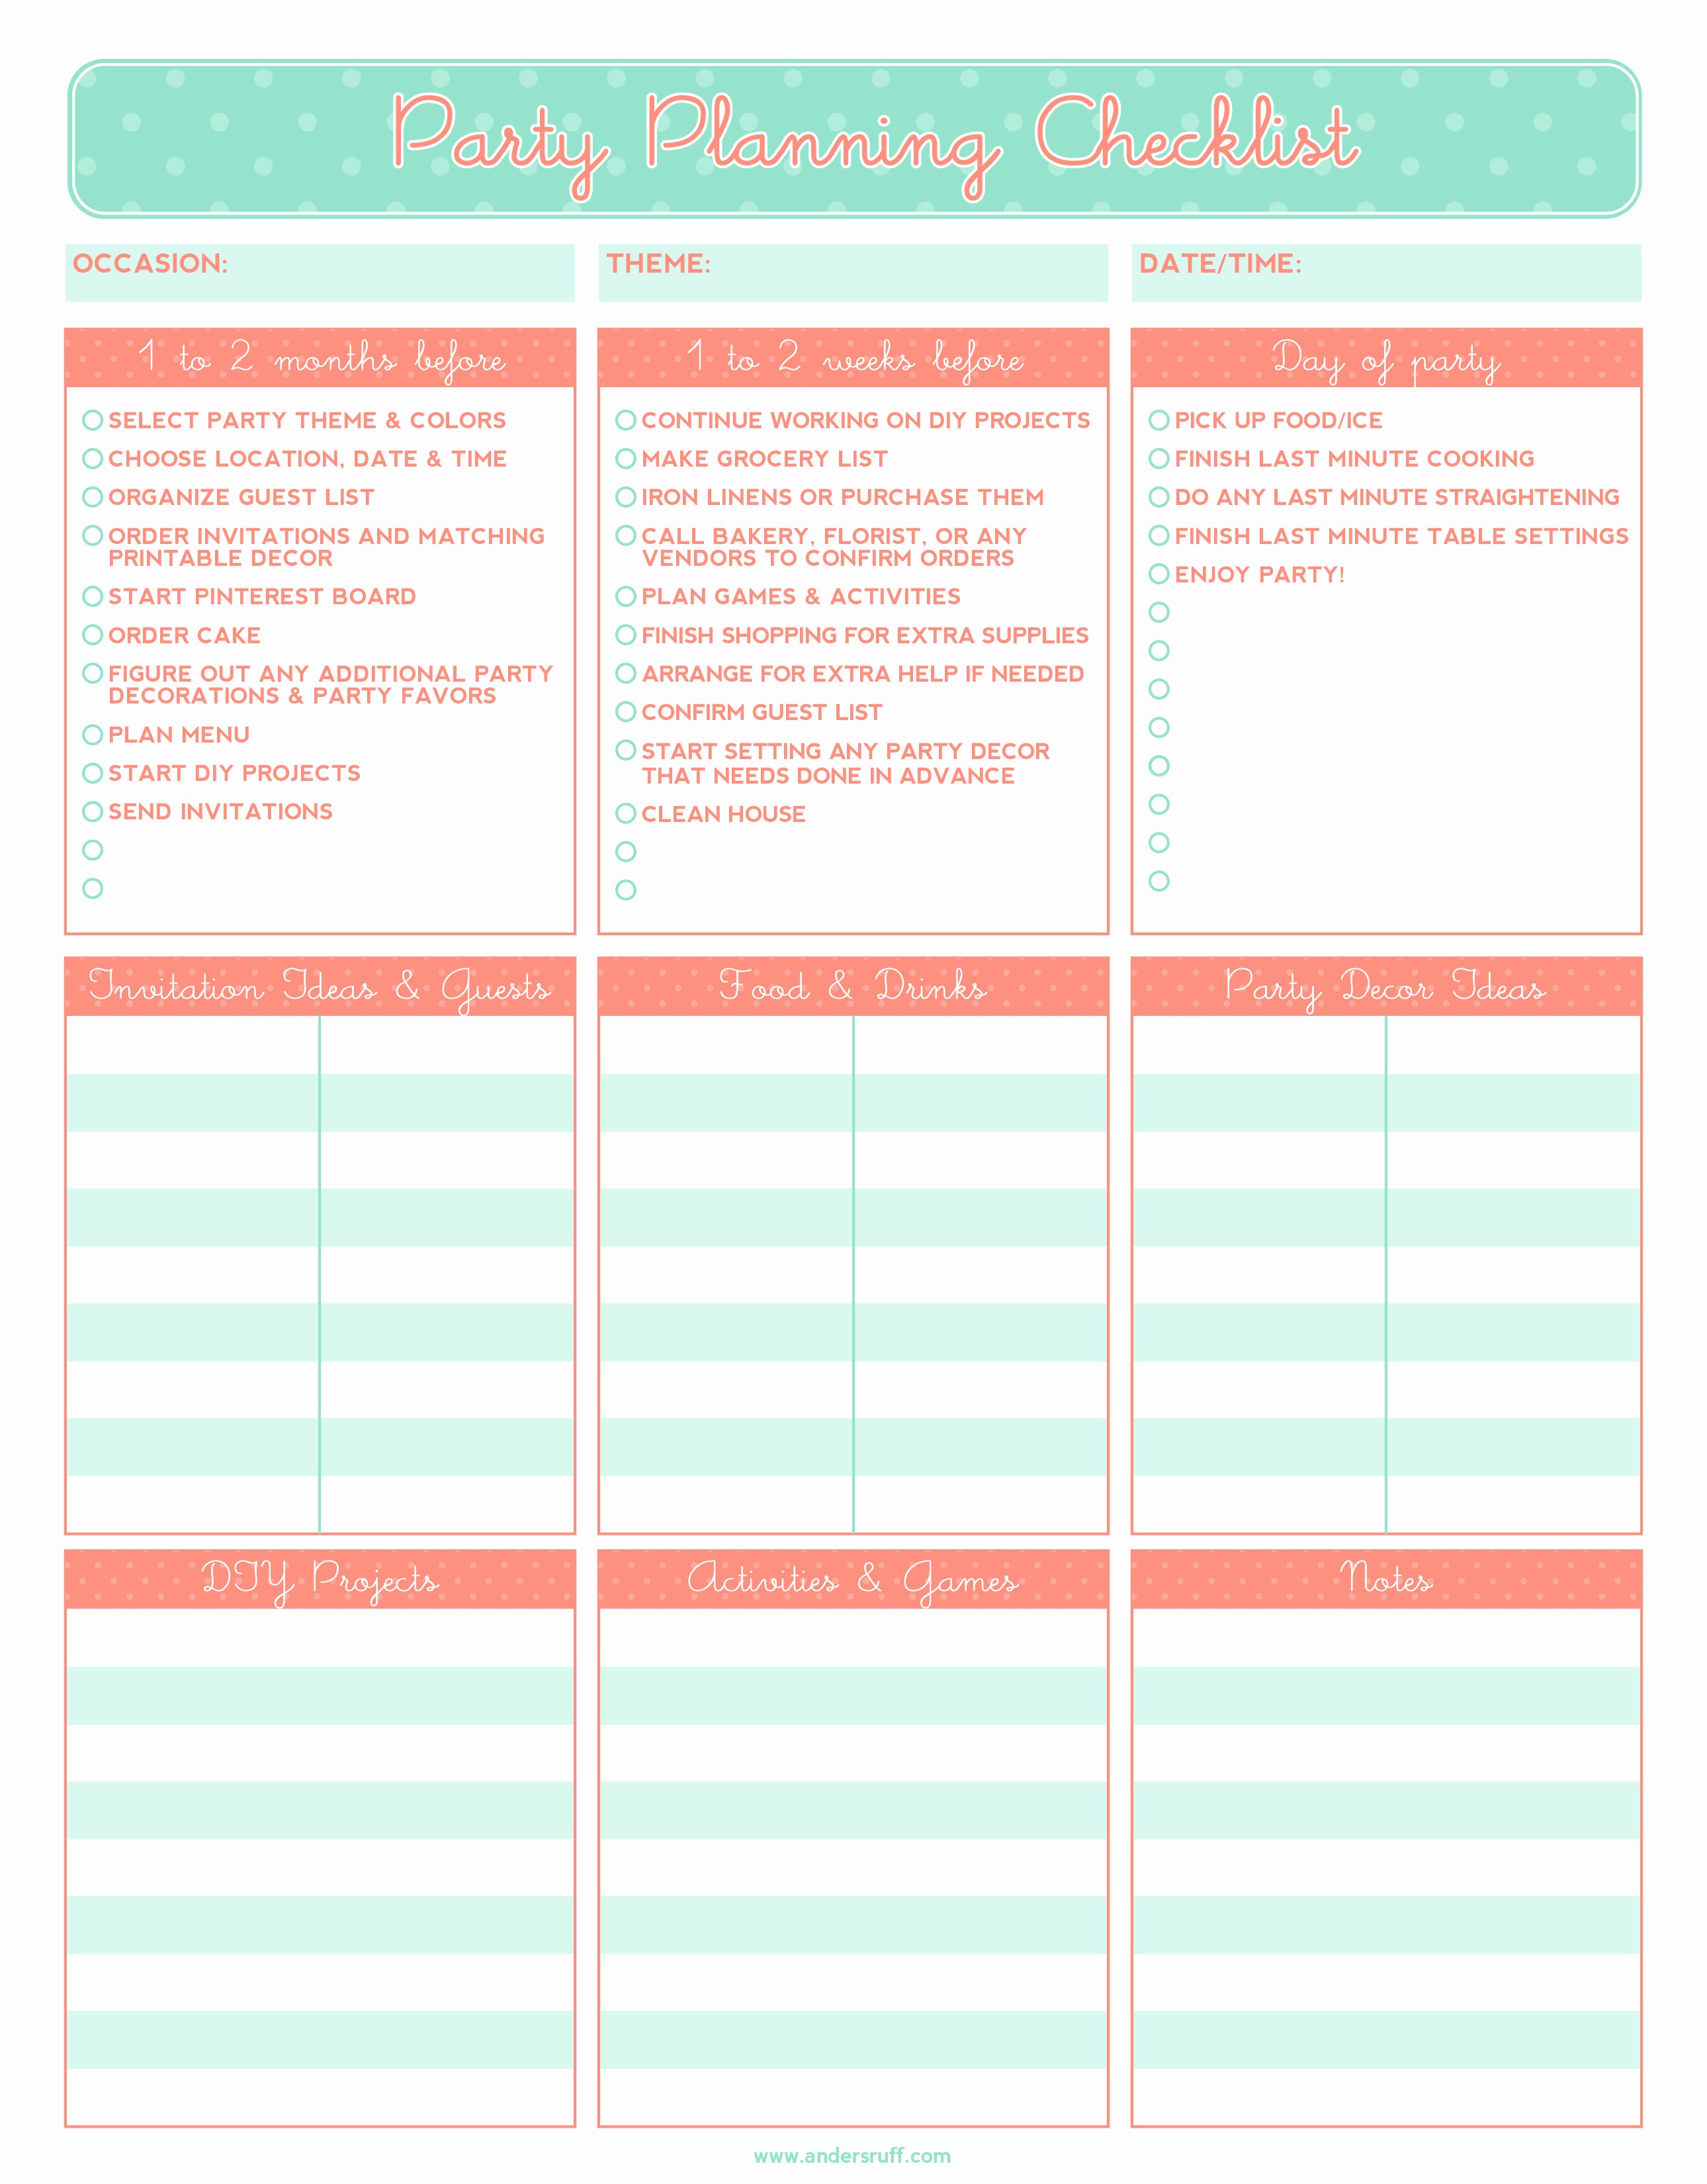 Party Planner Checklist Template Free Elegant 5 Party Planning Templates Excel Xlts